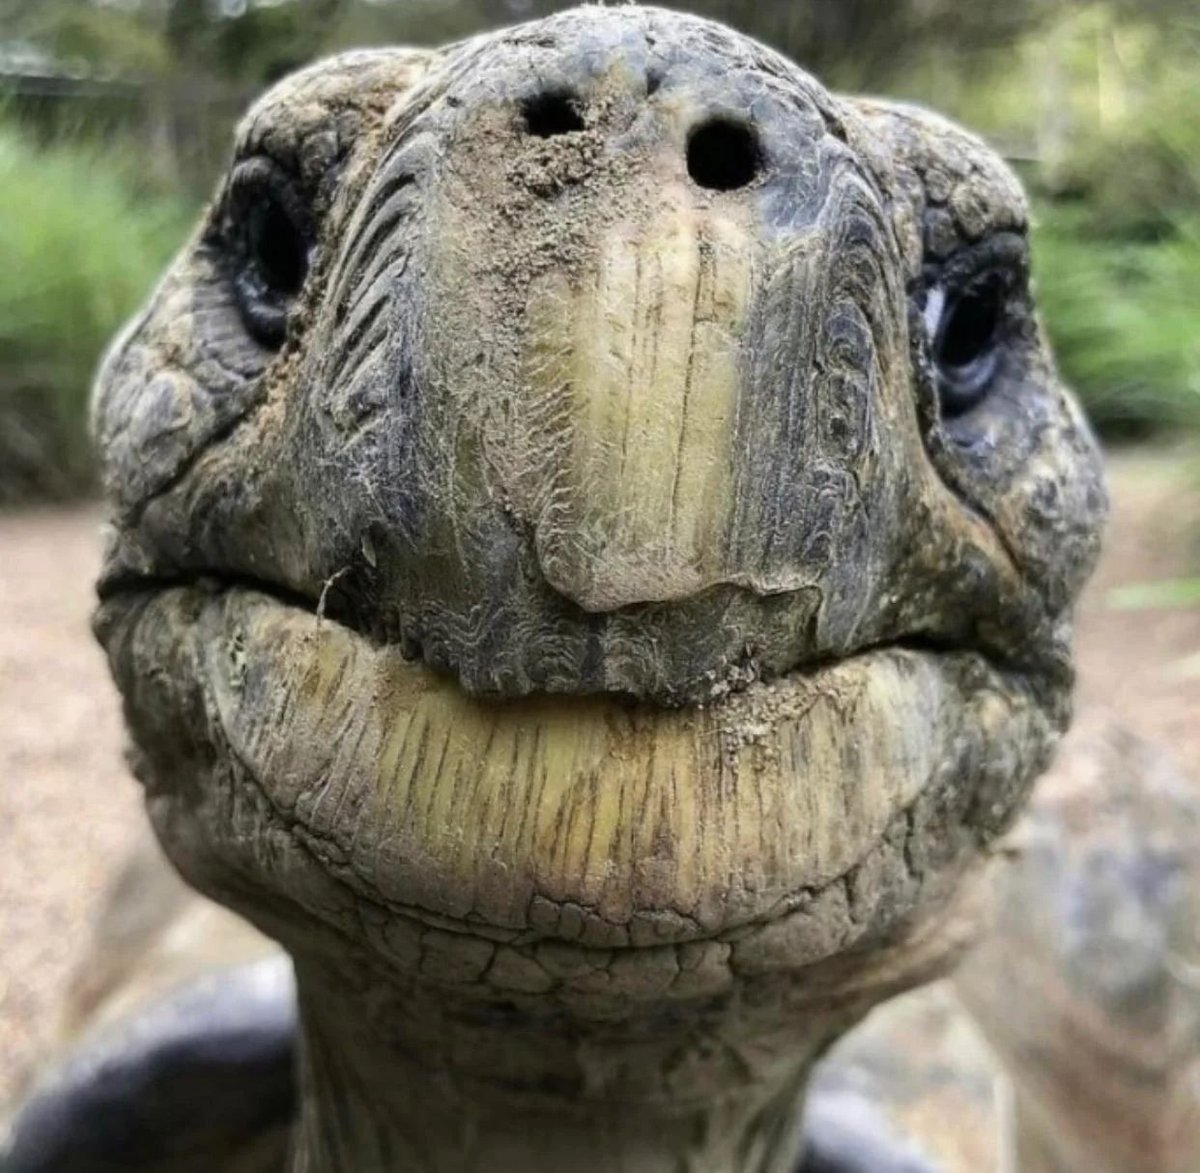 The face of a 191 year old tortoise, the oldest known living land animal.